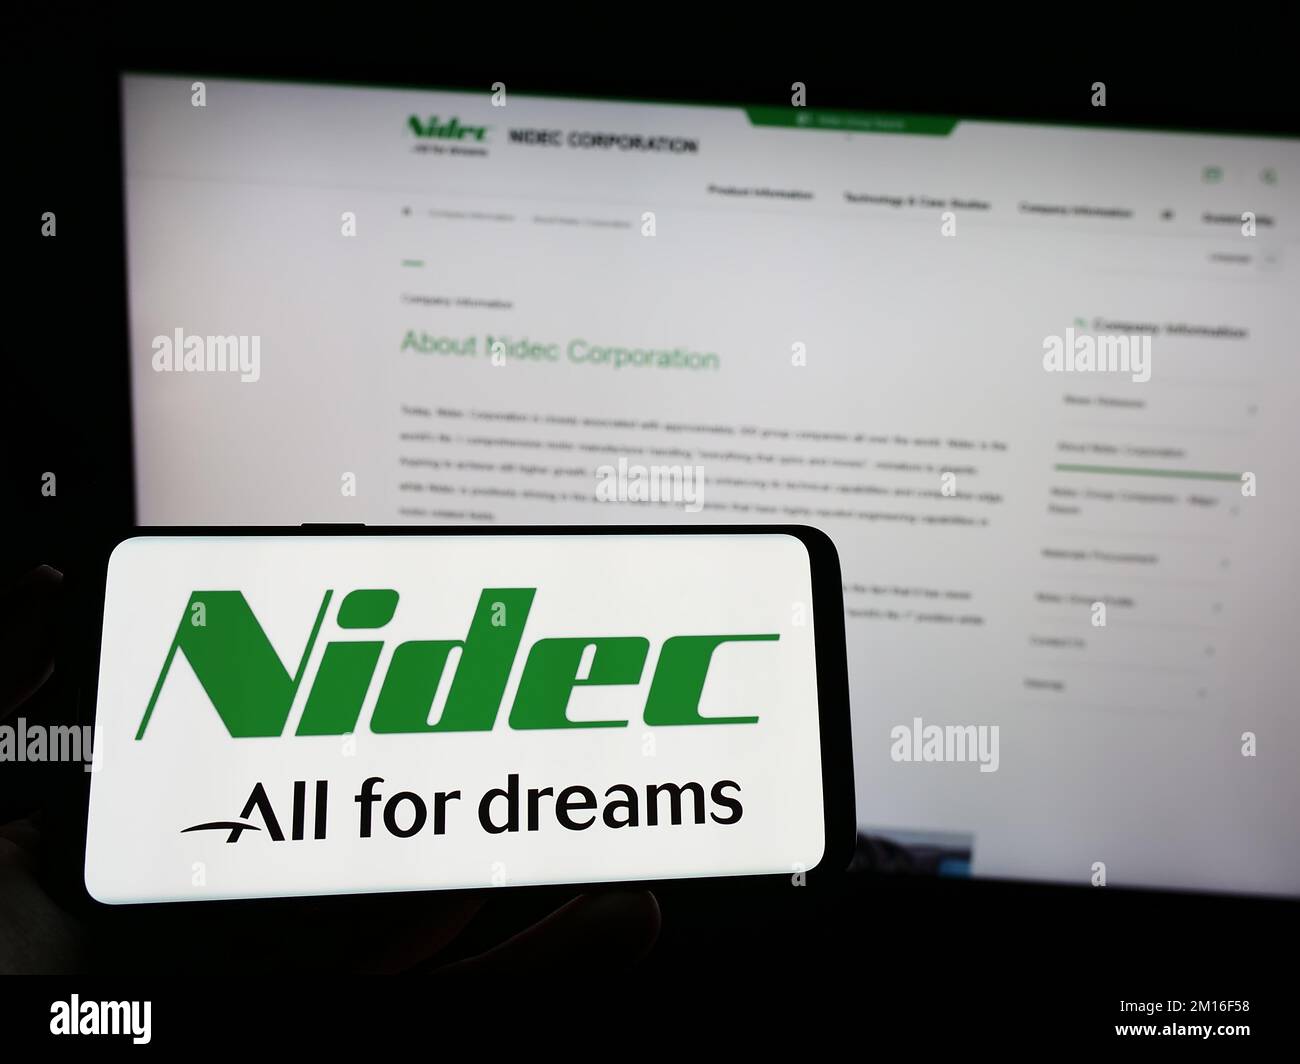 Person holding mobile phone with logo of Japanese motor company Nidec Corporation on screen in front of business web page. Focus on phone display. Stock Photo